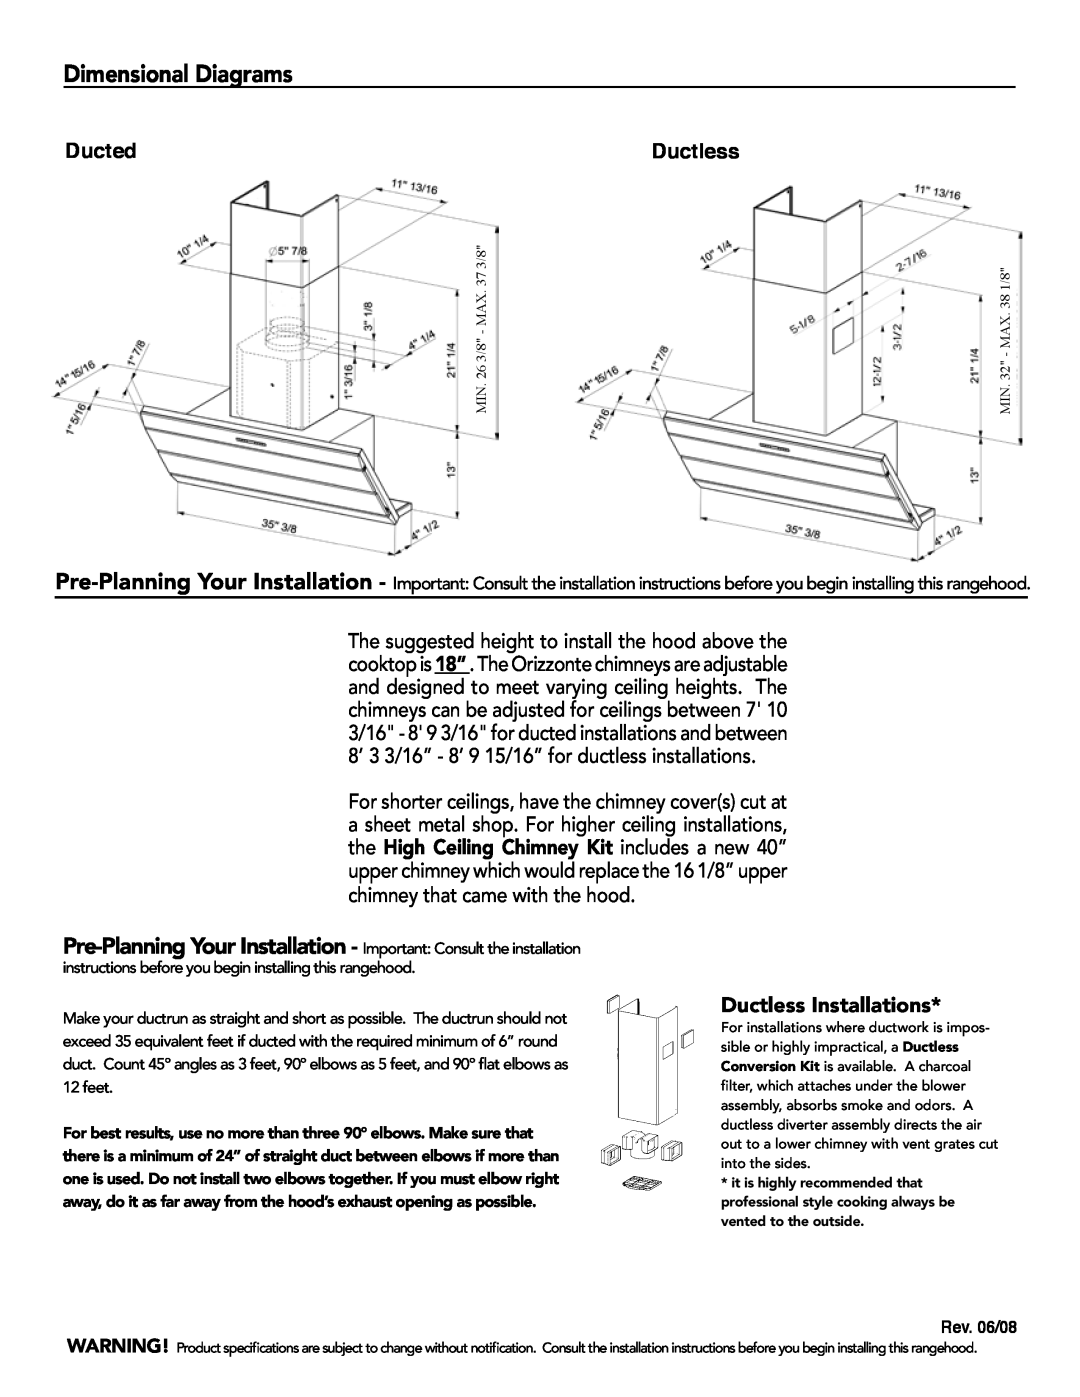 Faber 620000362 manual Dimensional Diagrams, Ducted, Ductless Installations, Rev. 06/08 